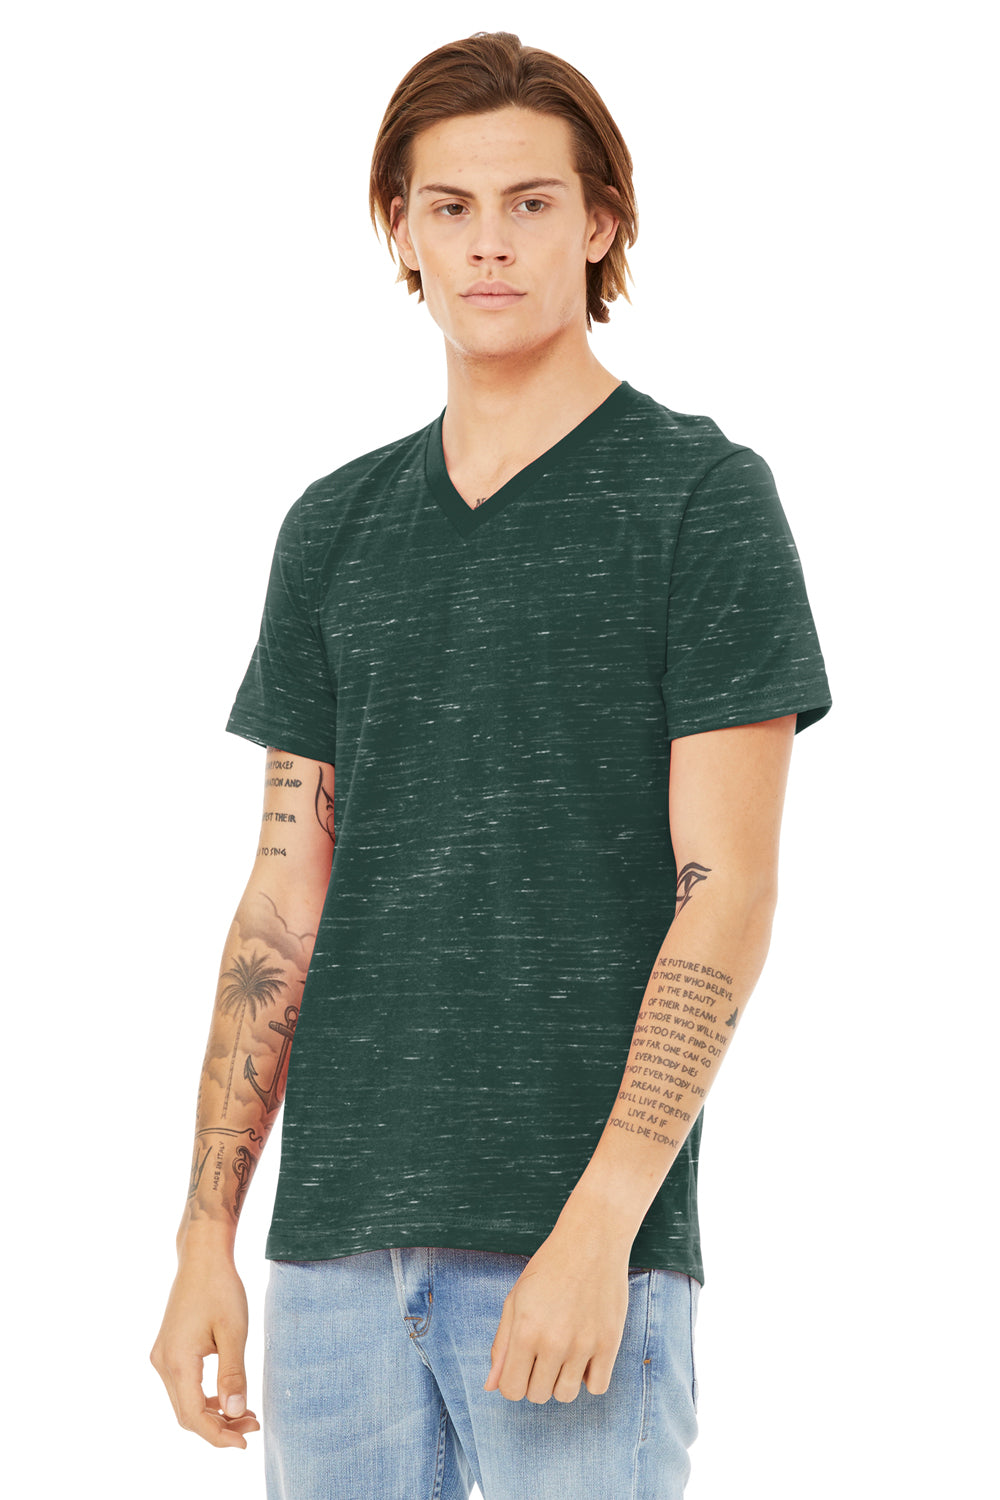 Bella + Canvas BC3655/3655C Mens Textured Jersey Short Sleeve V-Neck T-Shirt Forest Green Marble Model 3Q